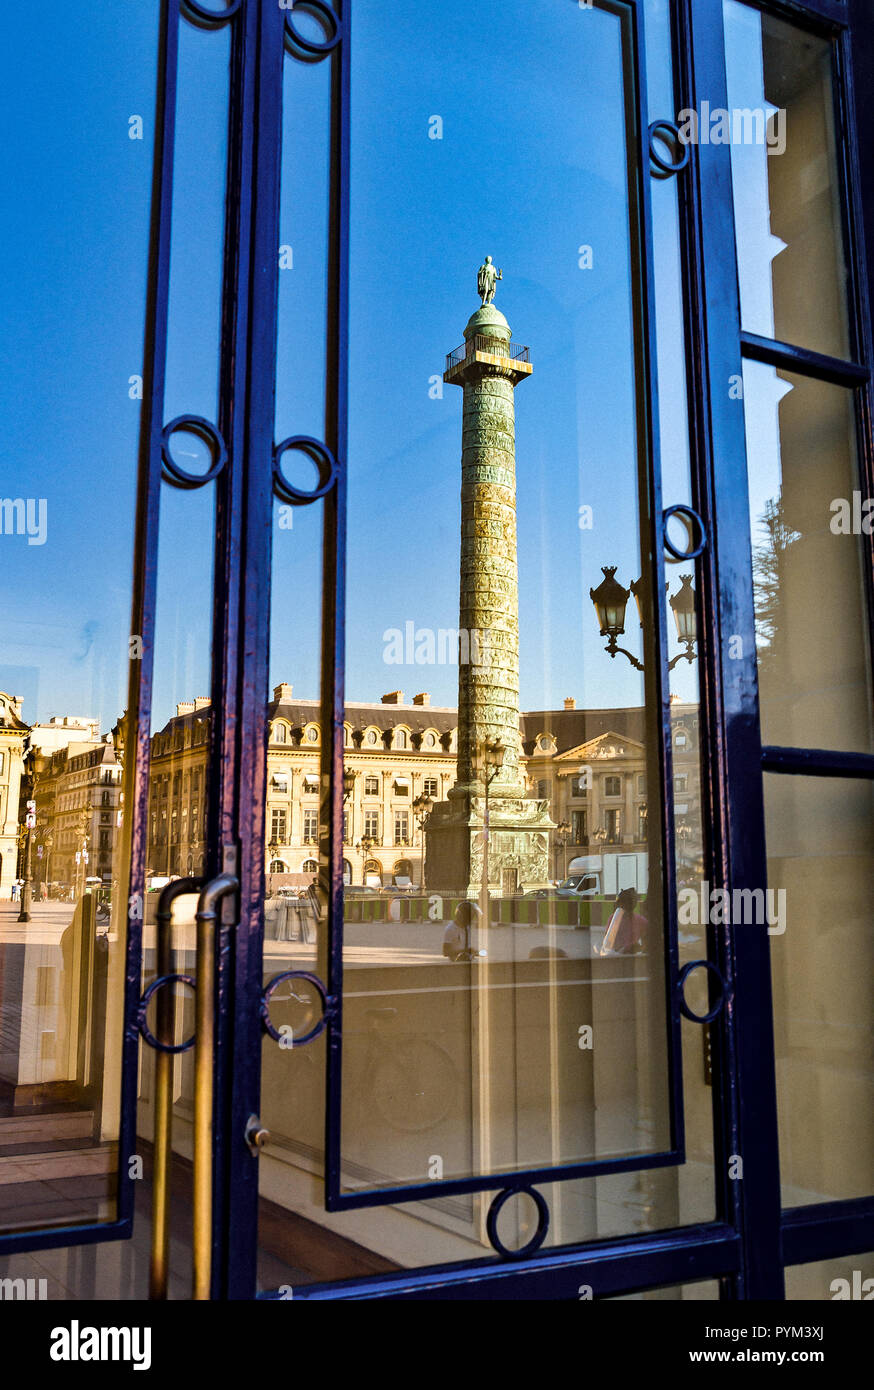 France Paris, reflection of the column on a shopwindow in Place Vendome Stock Photo